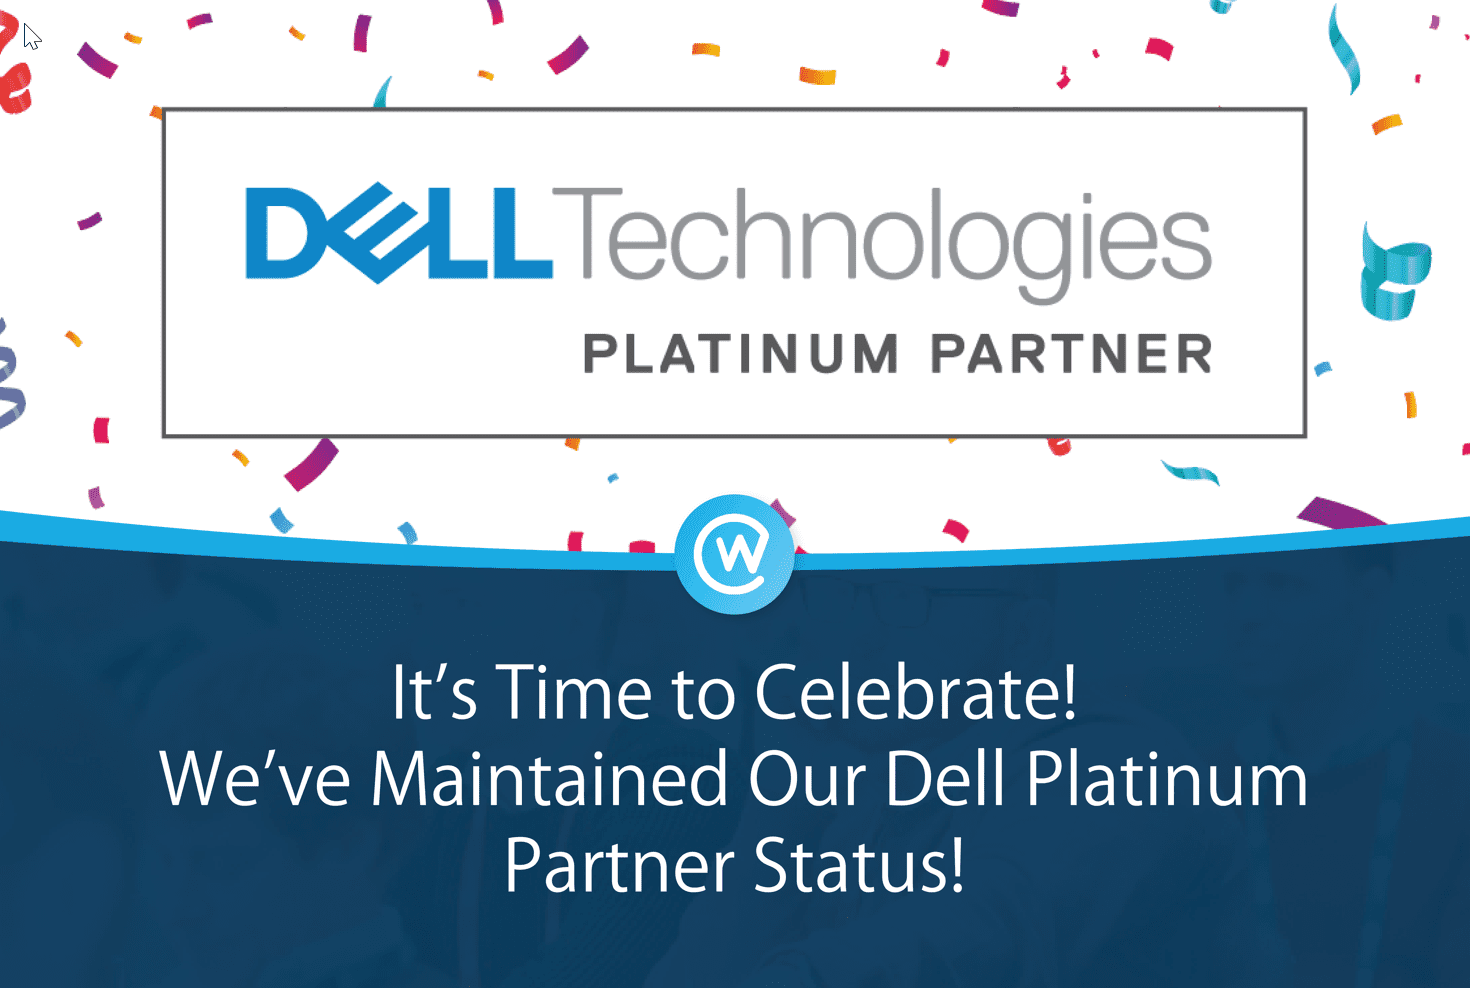 It’s Time to Celebrate! We’ve Maintained Our Dell Platinum Partner Status!